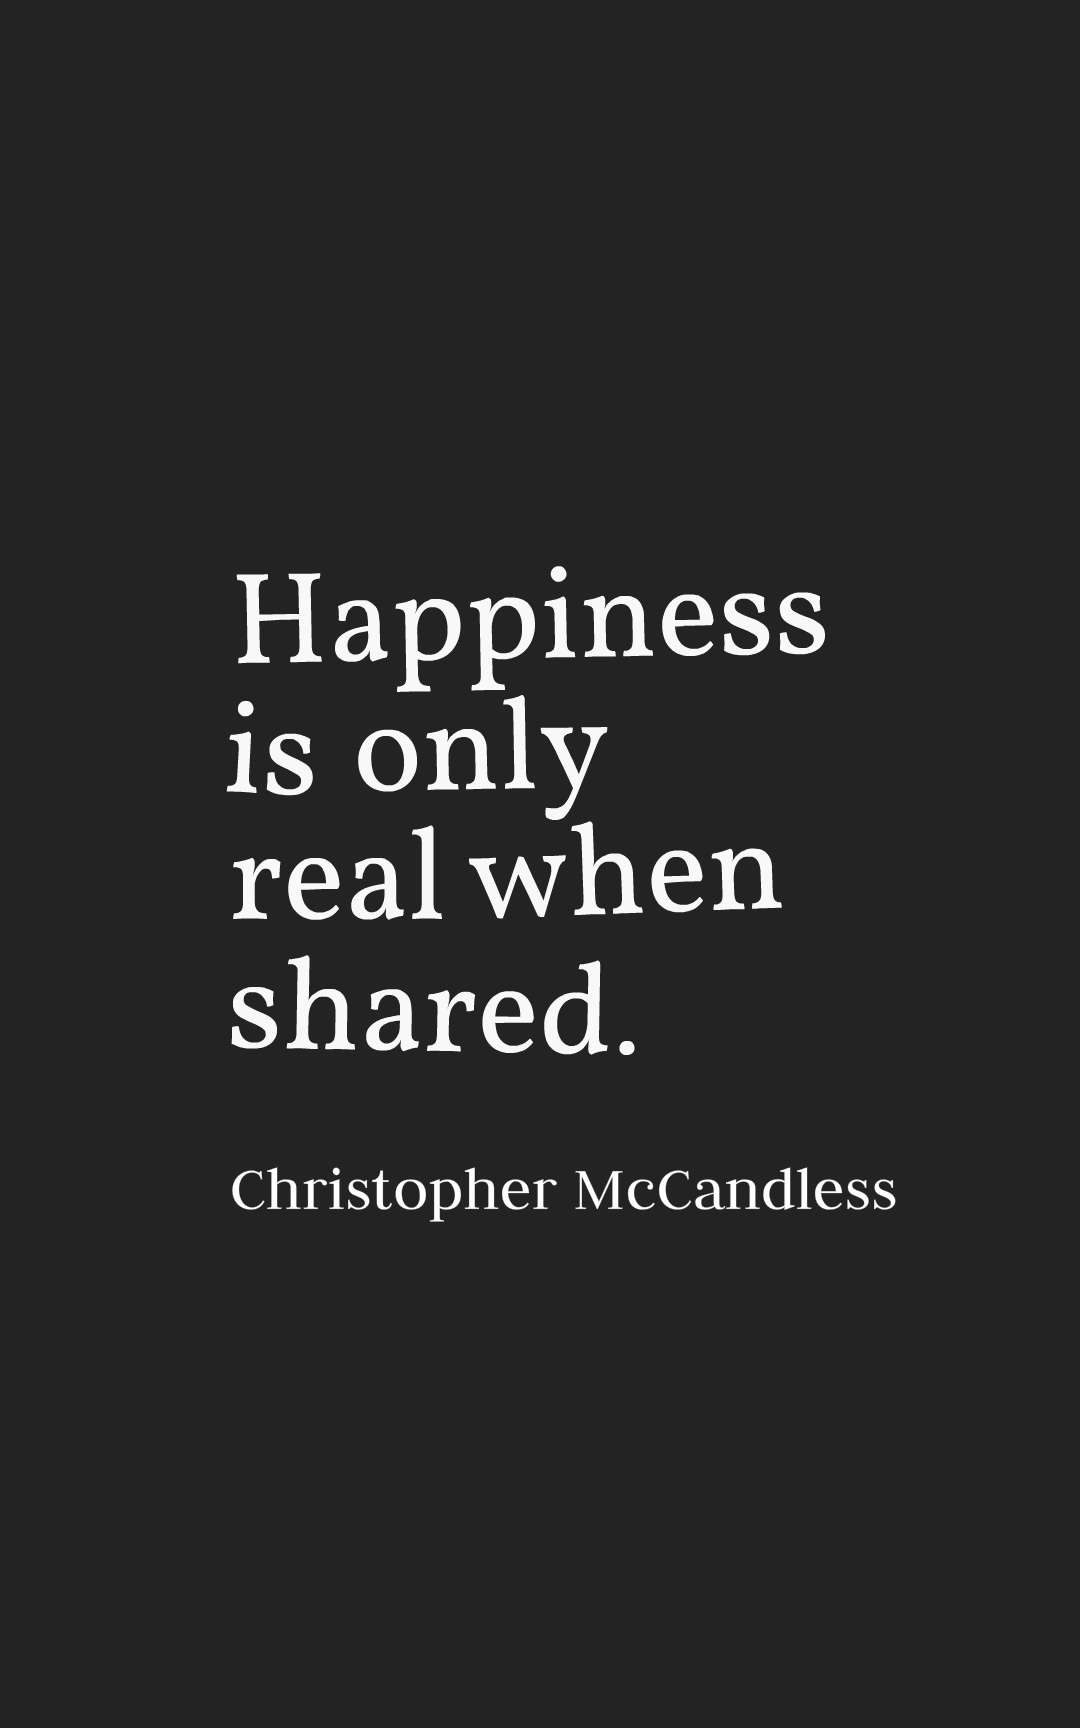 45 Inspirational Happiness Quotes And Sayings With Images